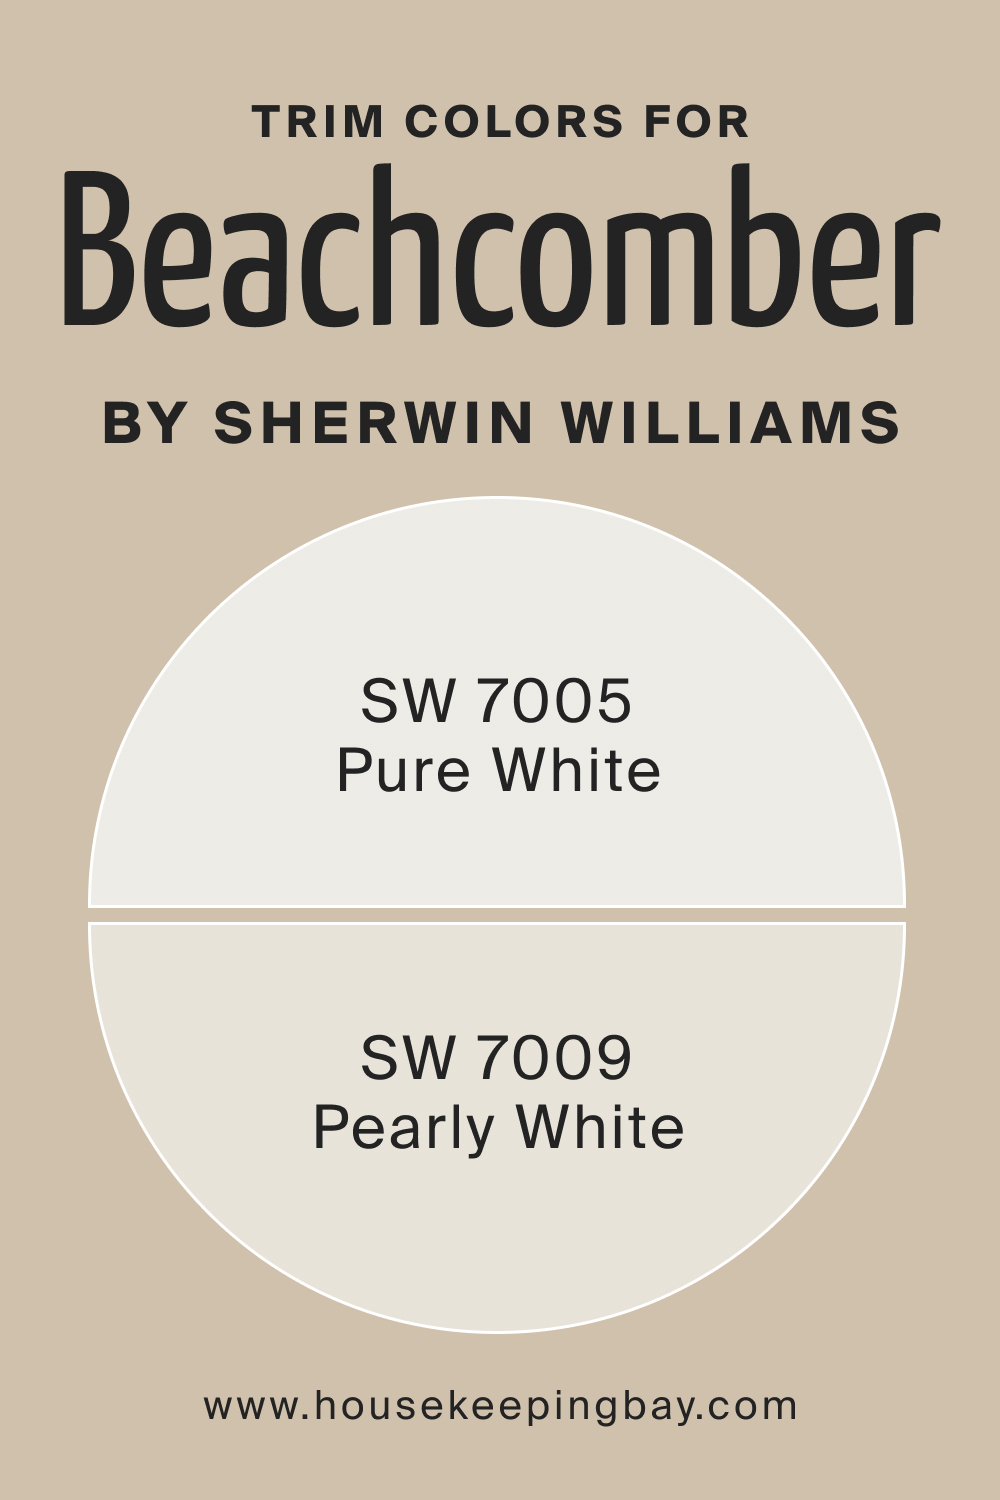 Trim Colors of SW 9617 Beachcomber by Sherwin Williams